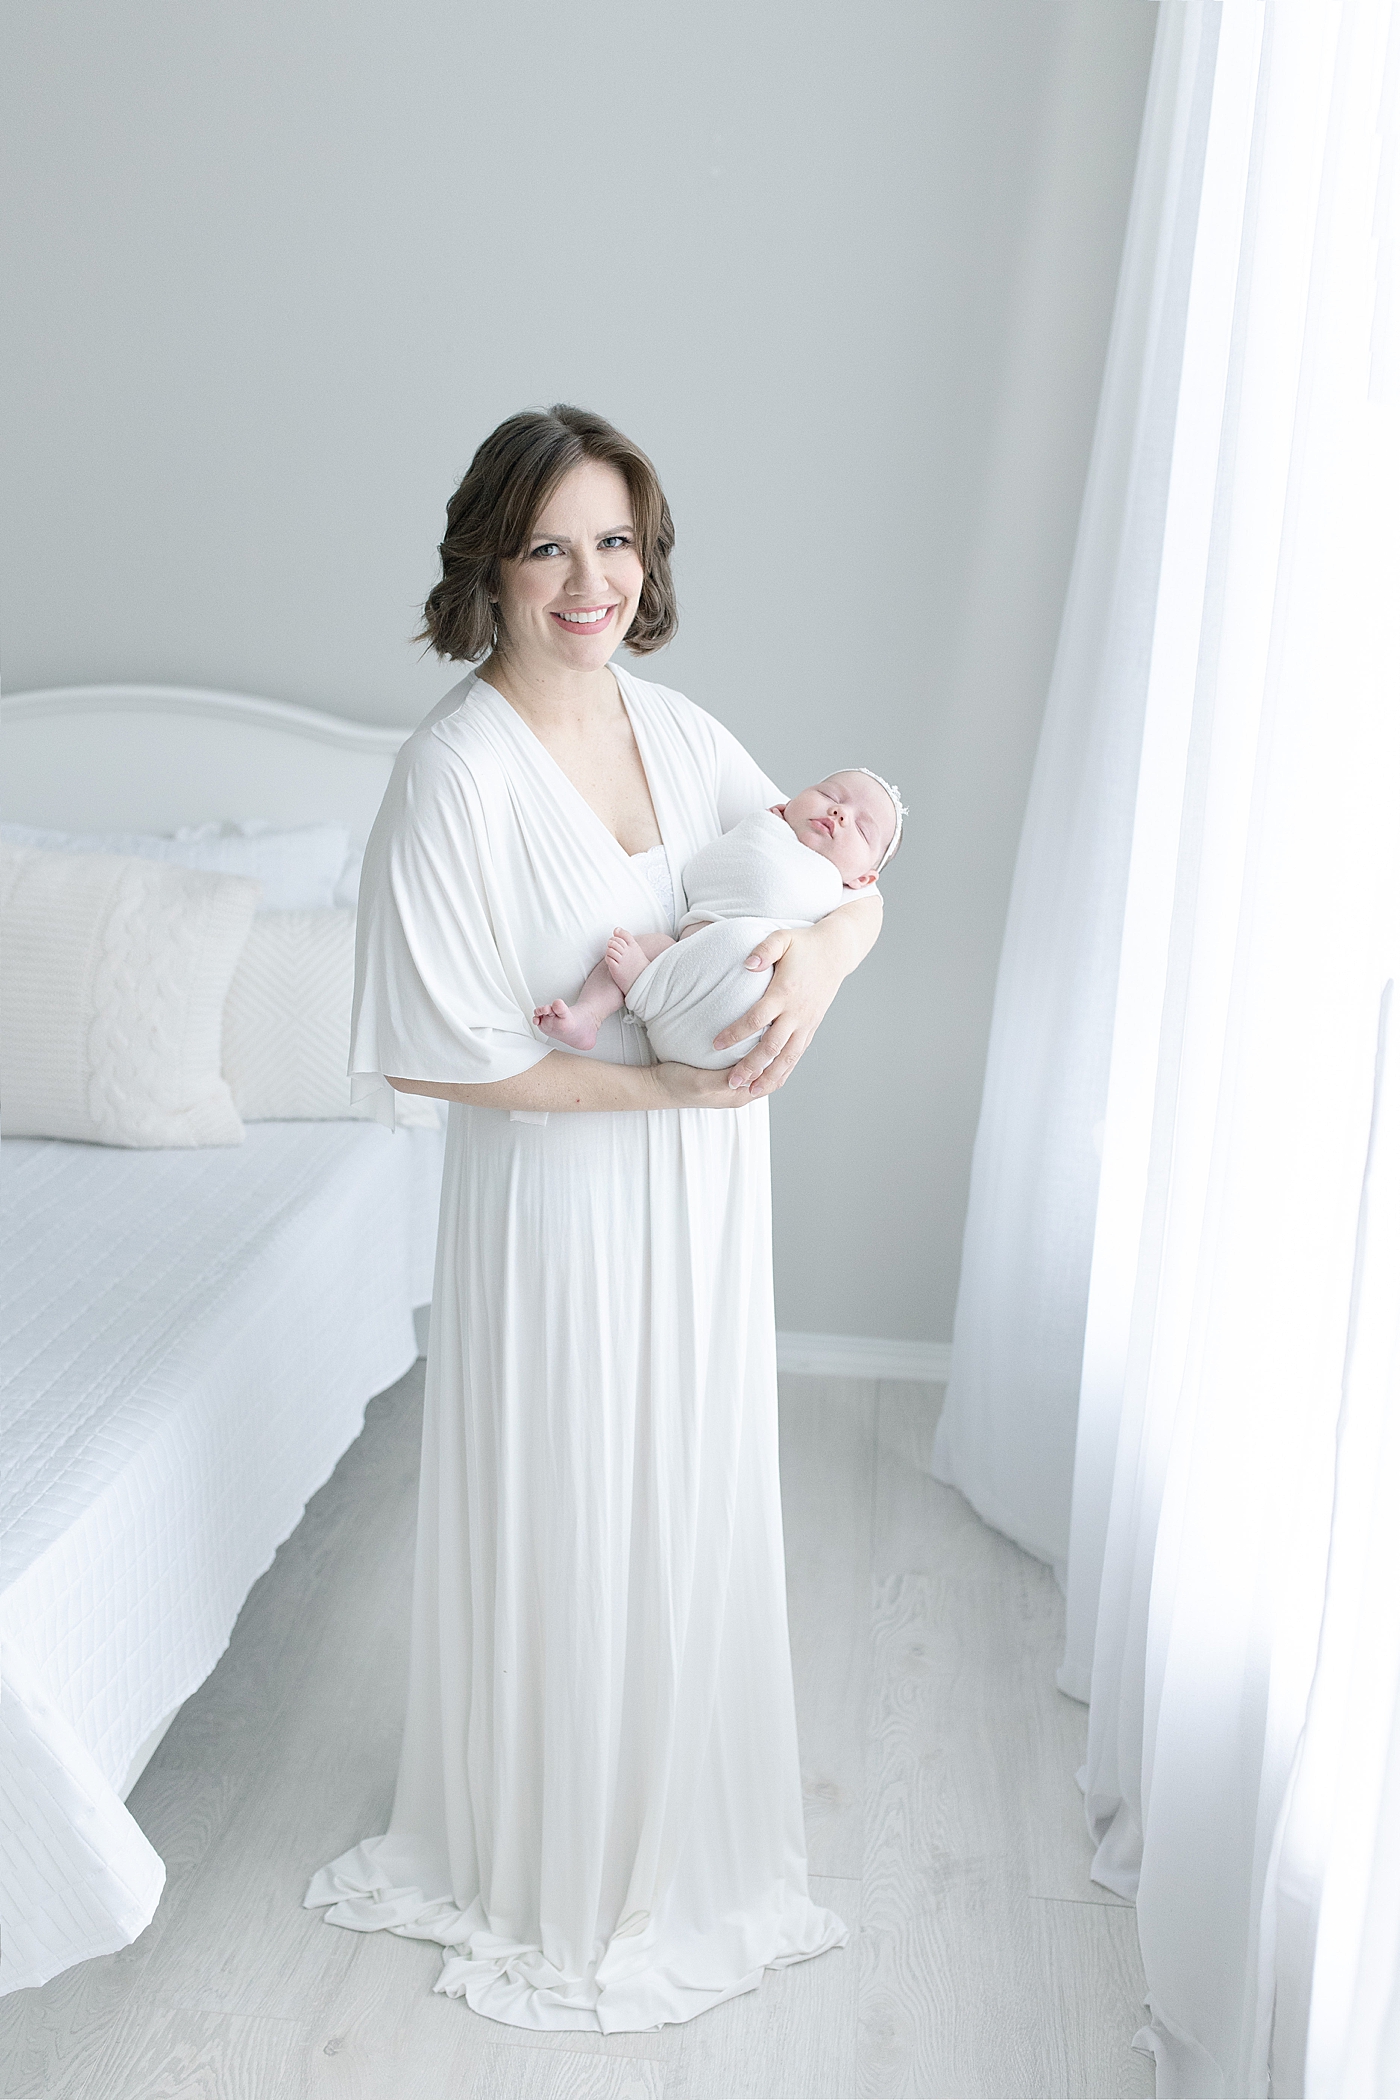 Mom in flowing white dress holding baby girl in a swaddle | Photo by Little Sunshine Photography 